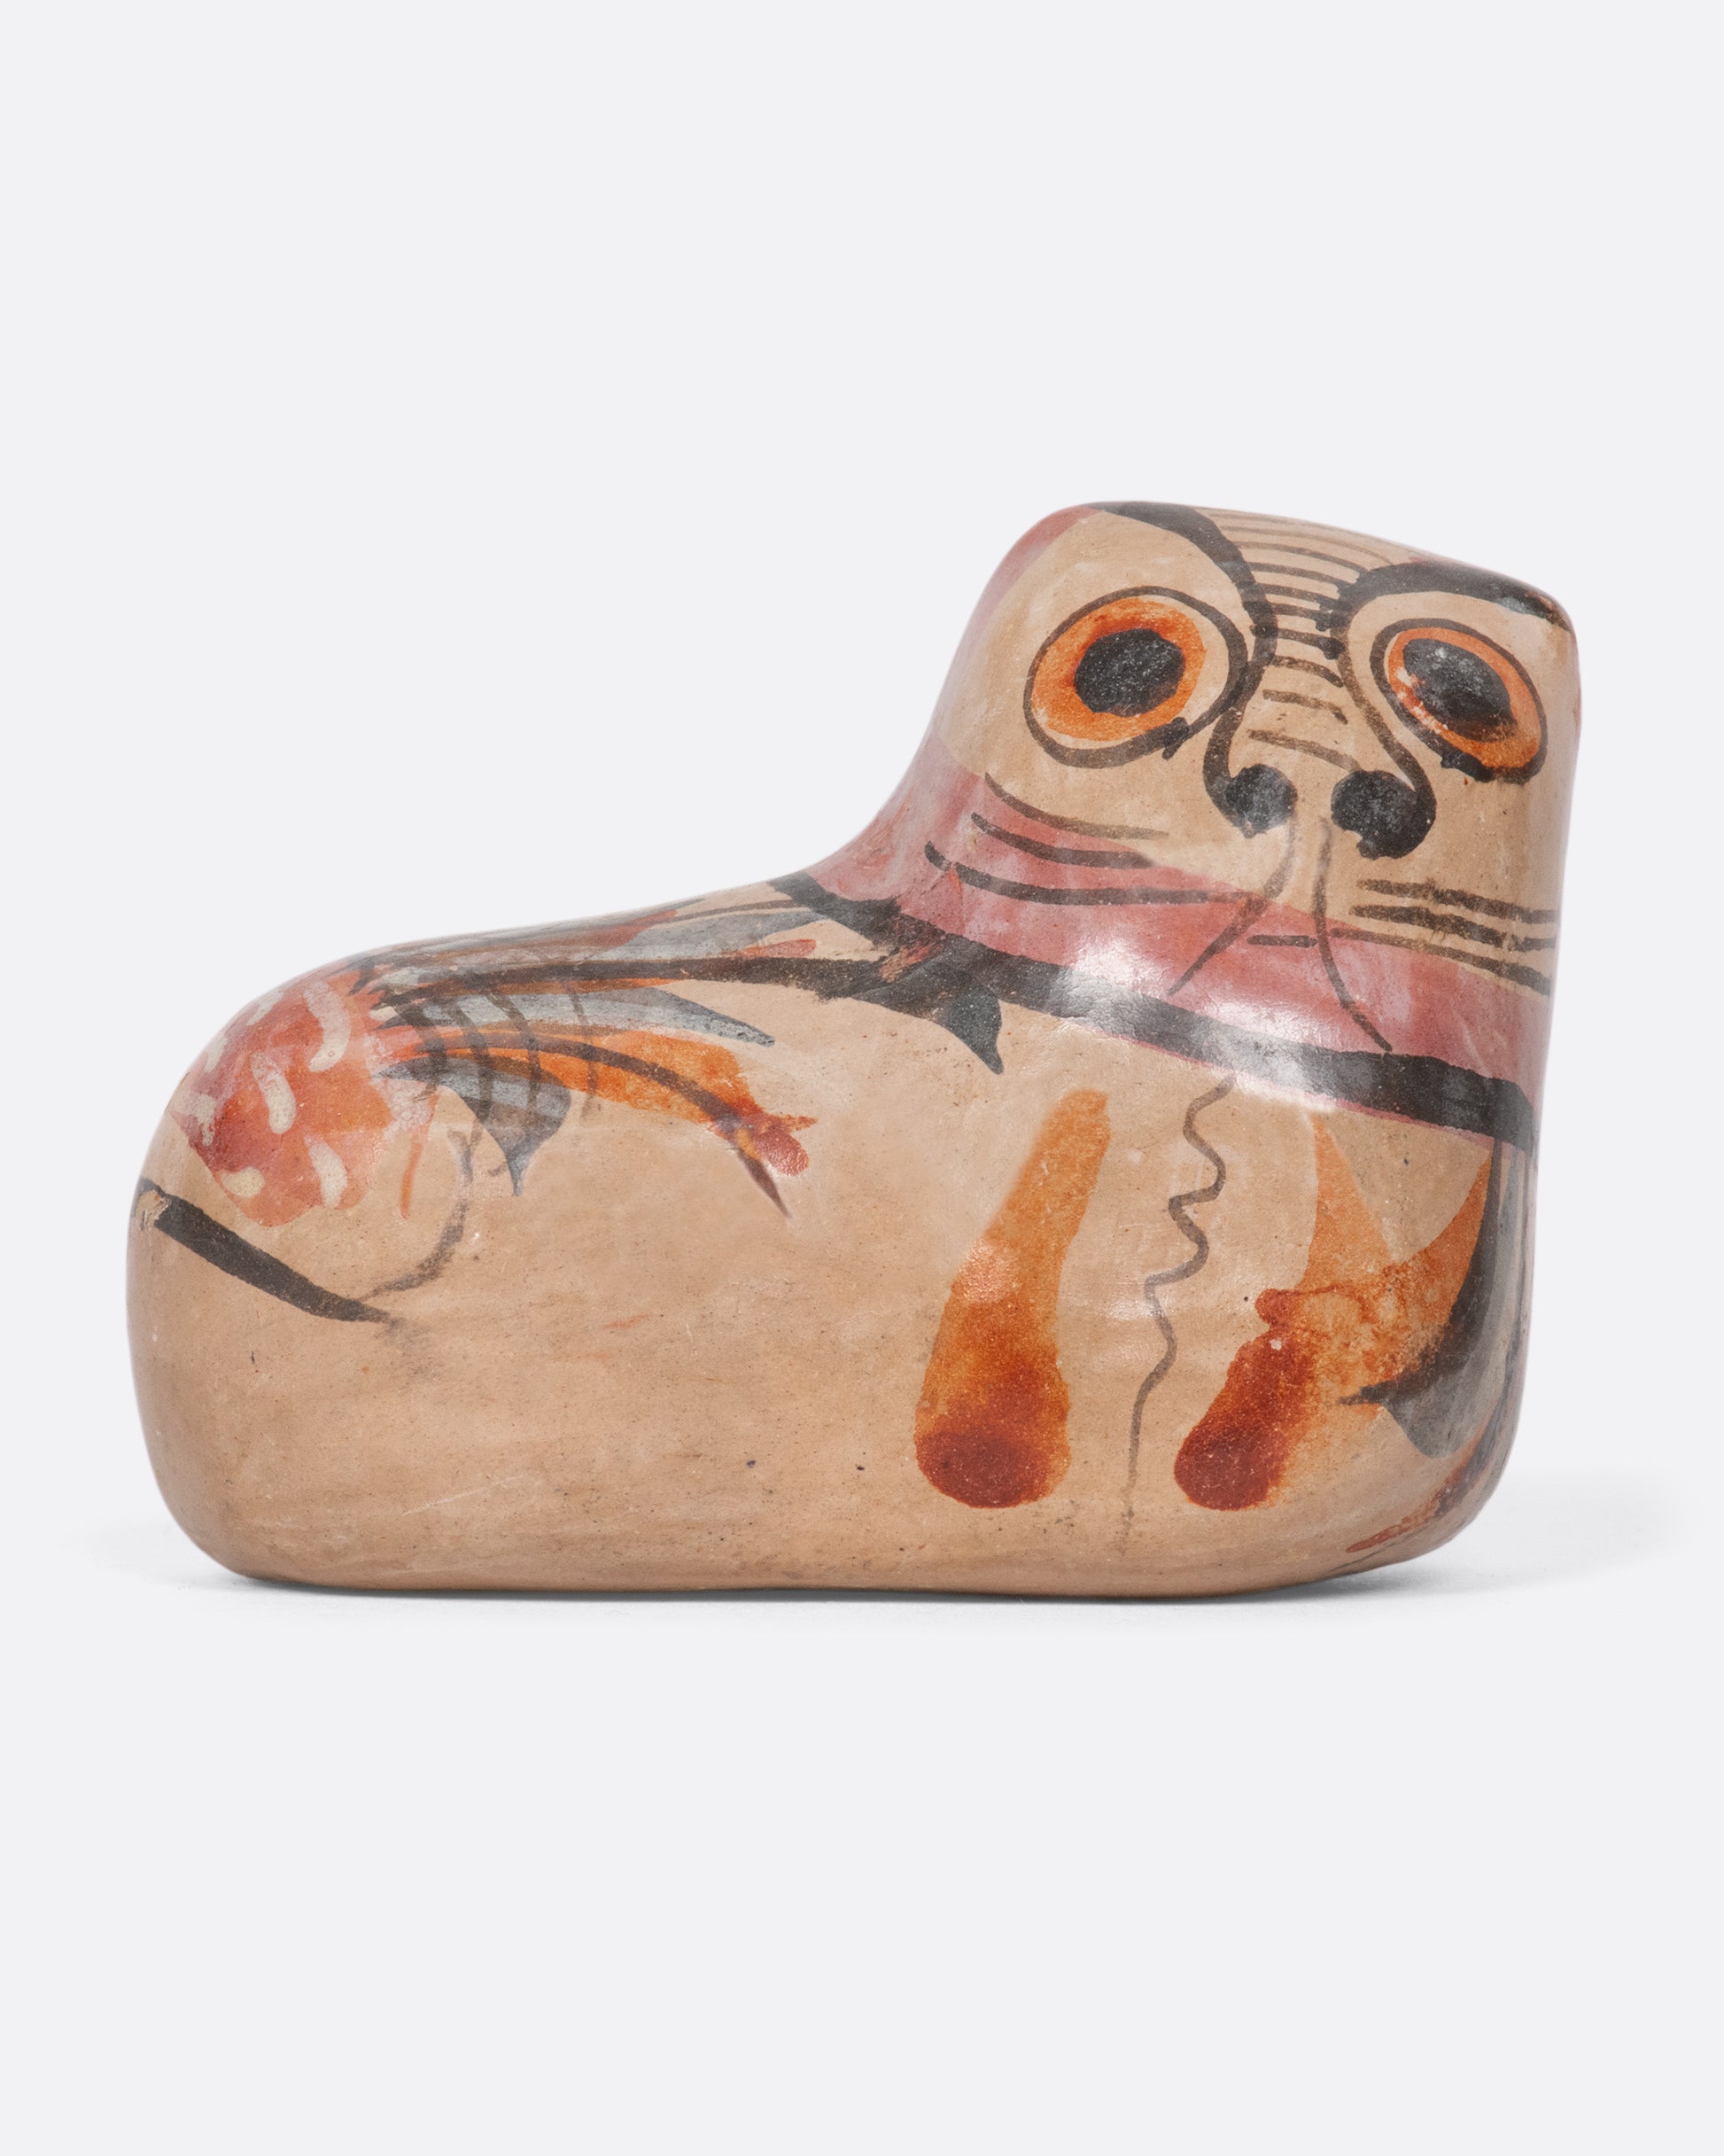 A vintage ceramic rounded cat figurine with hand painted features.